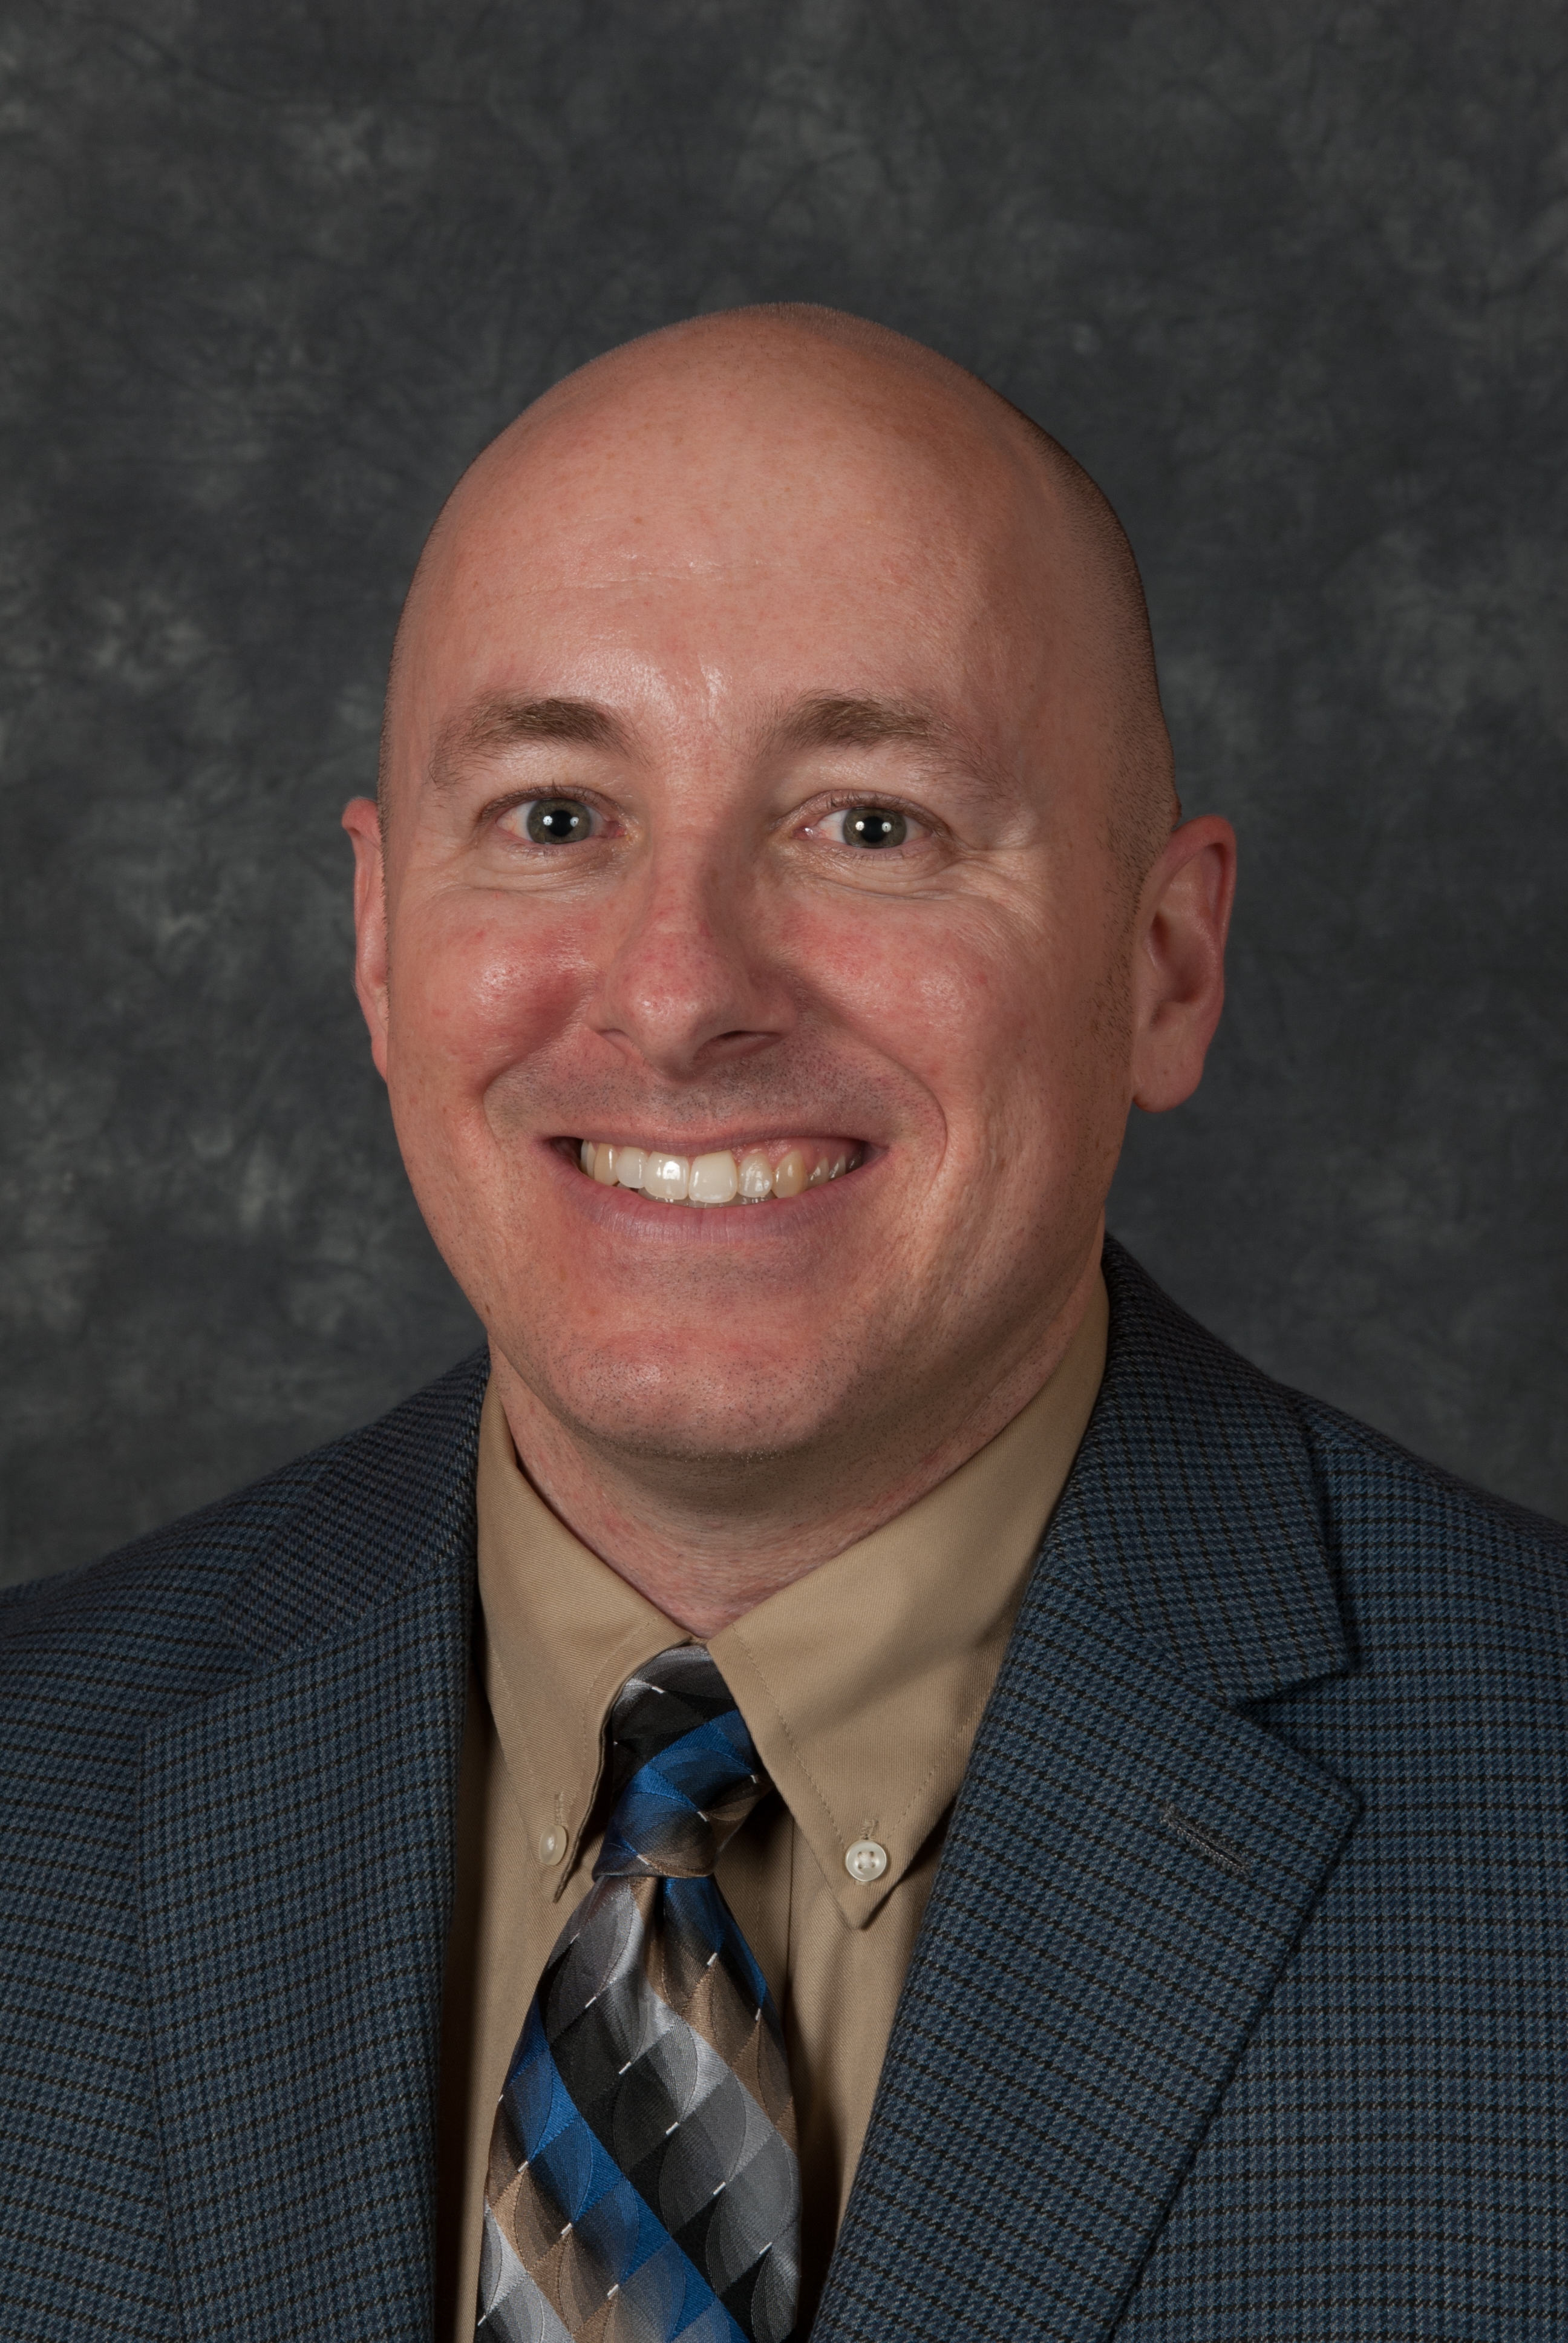 Chad is a white man pictured smiling wearing a dark houndstooth suit, neutral shirt, dark tie, against a mottled dark background in this professional headshot